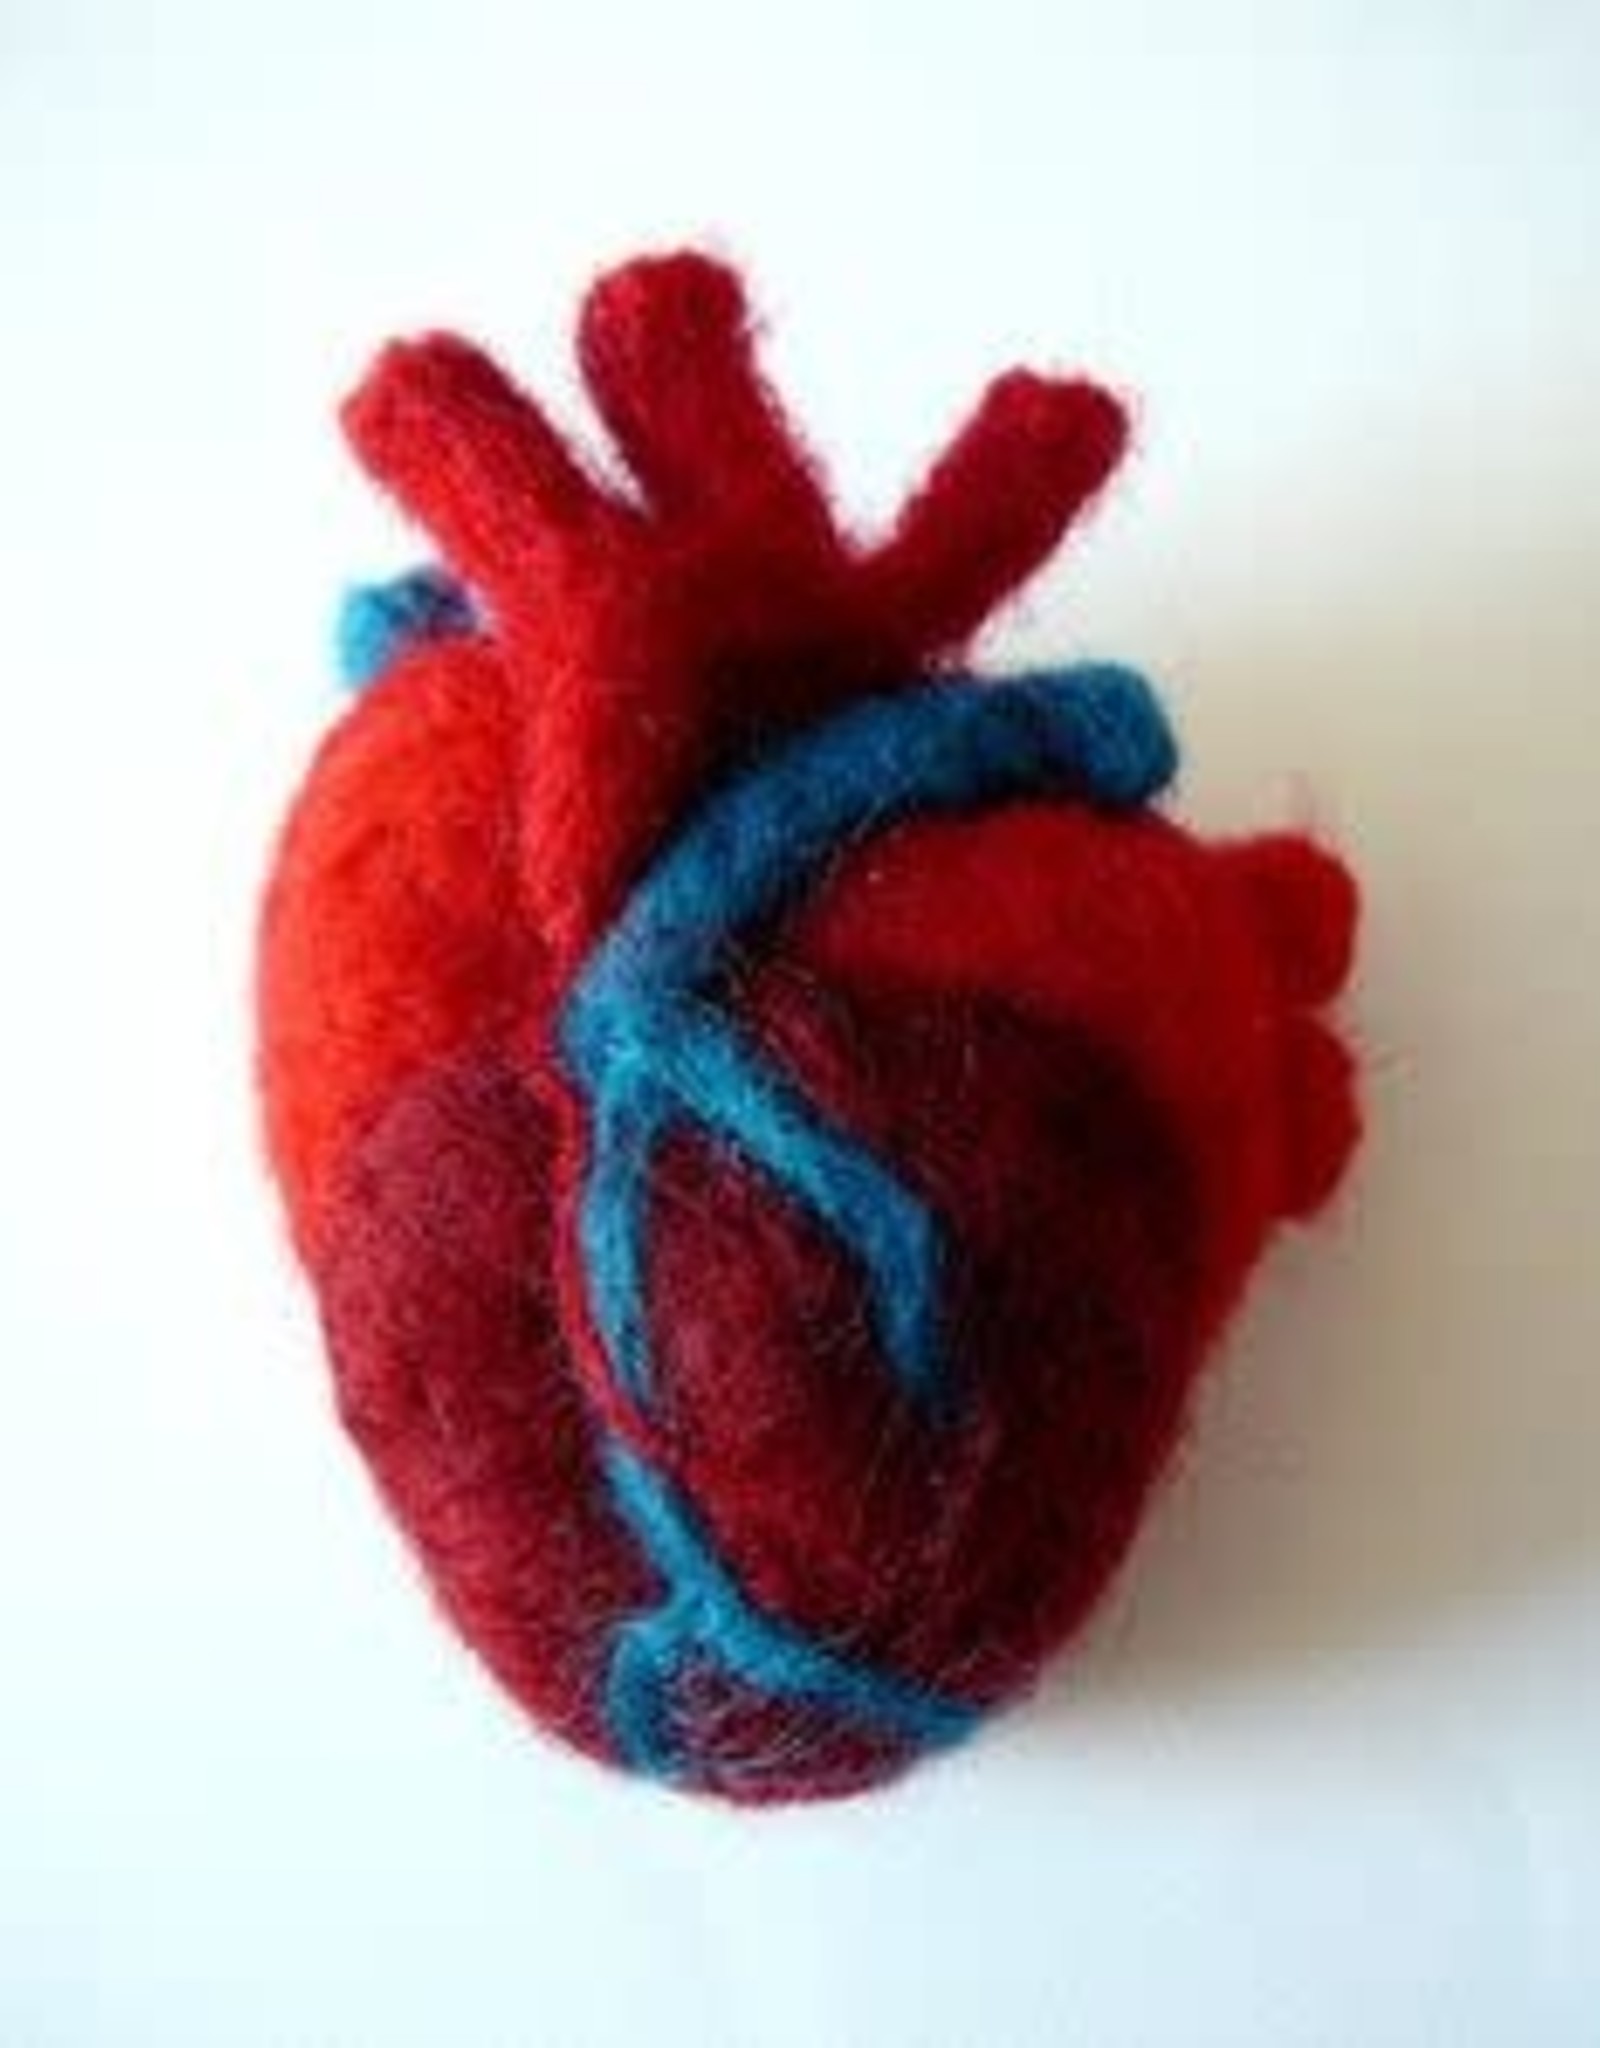 Megan Fiscus Needle Felting:  Anatomical Human Heart - Tuesday, February 1st, 11:30am-1:30pm